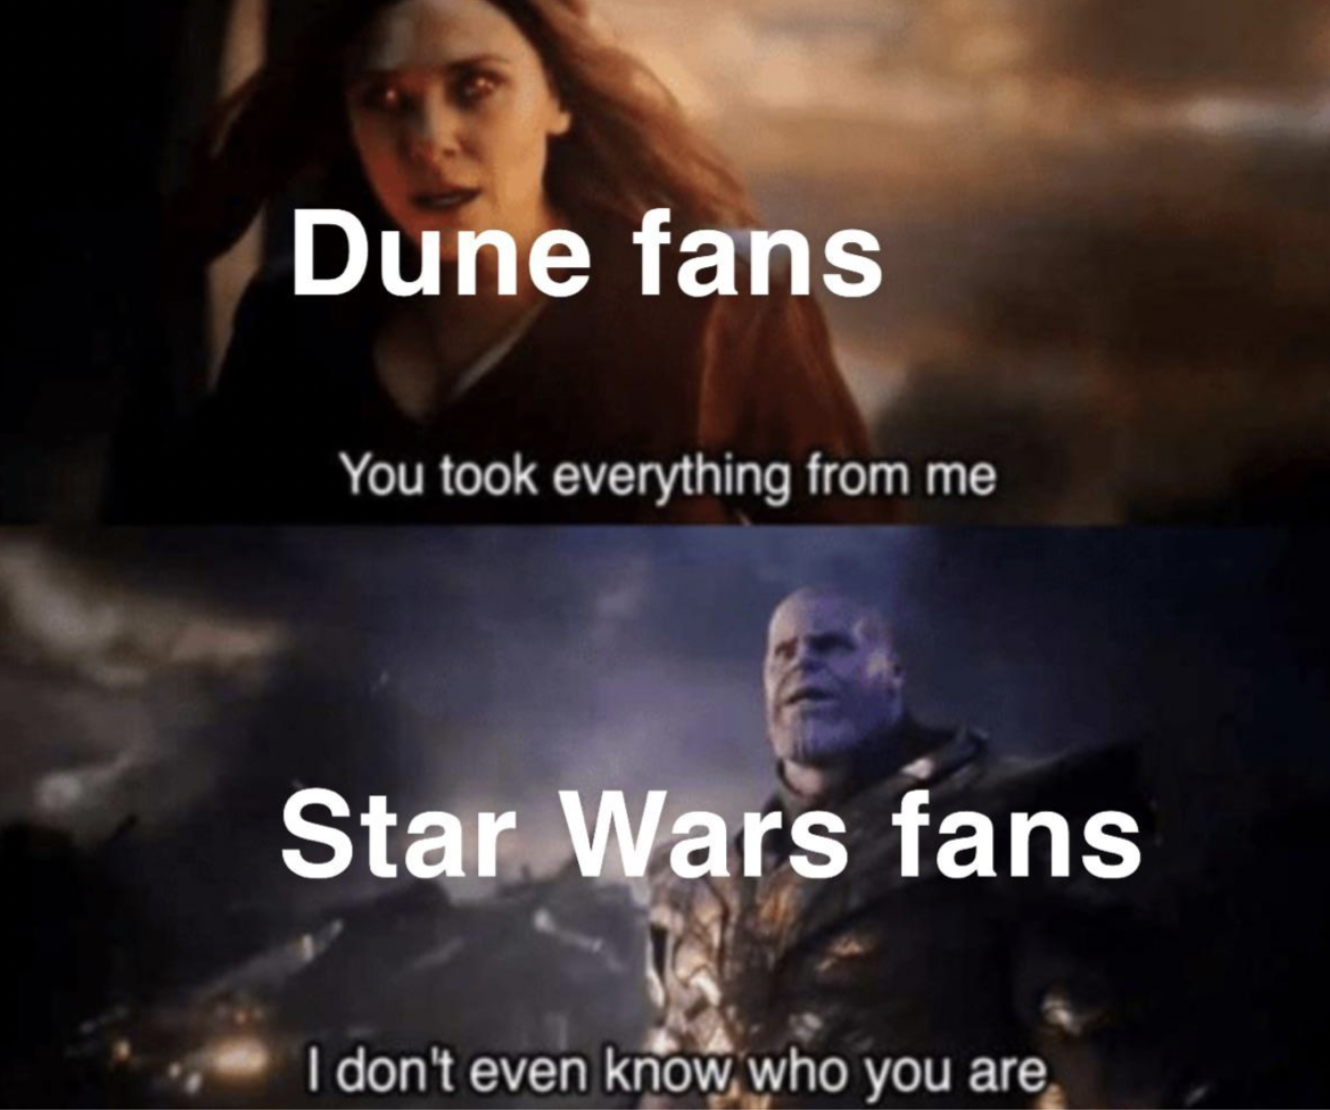 wow armory - Dune fans You took everything from me Star Wars fans I don't even know who you are